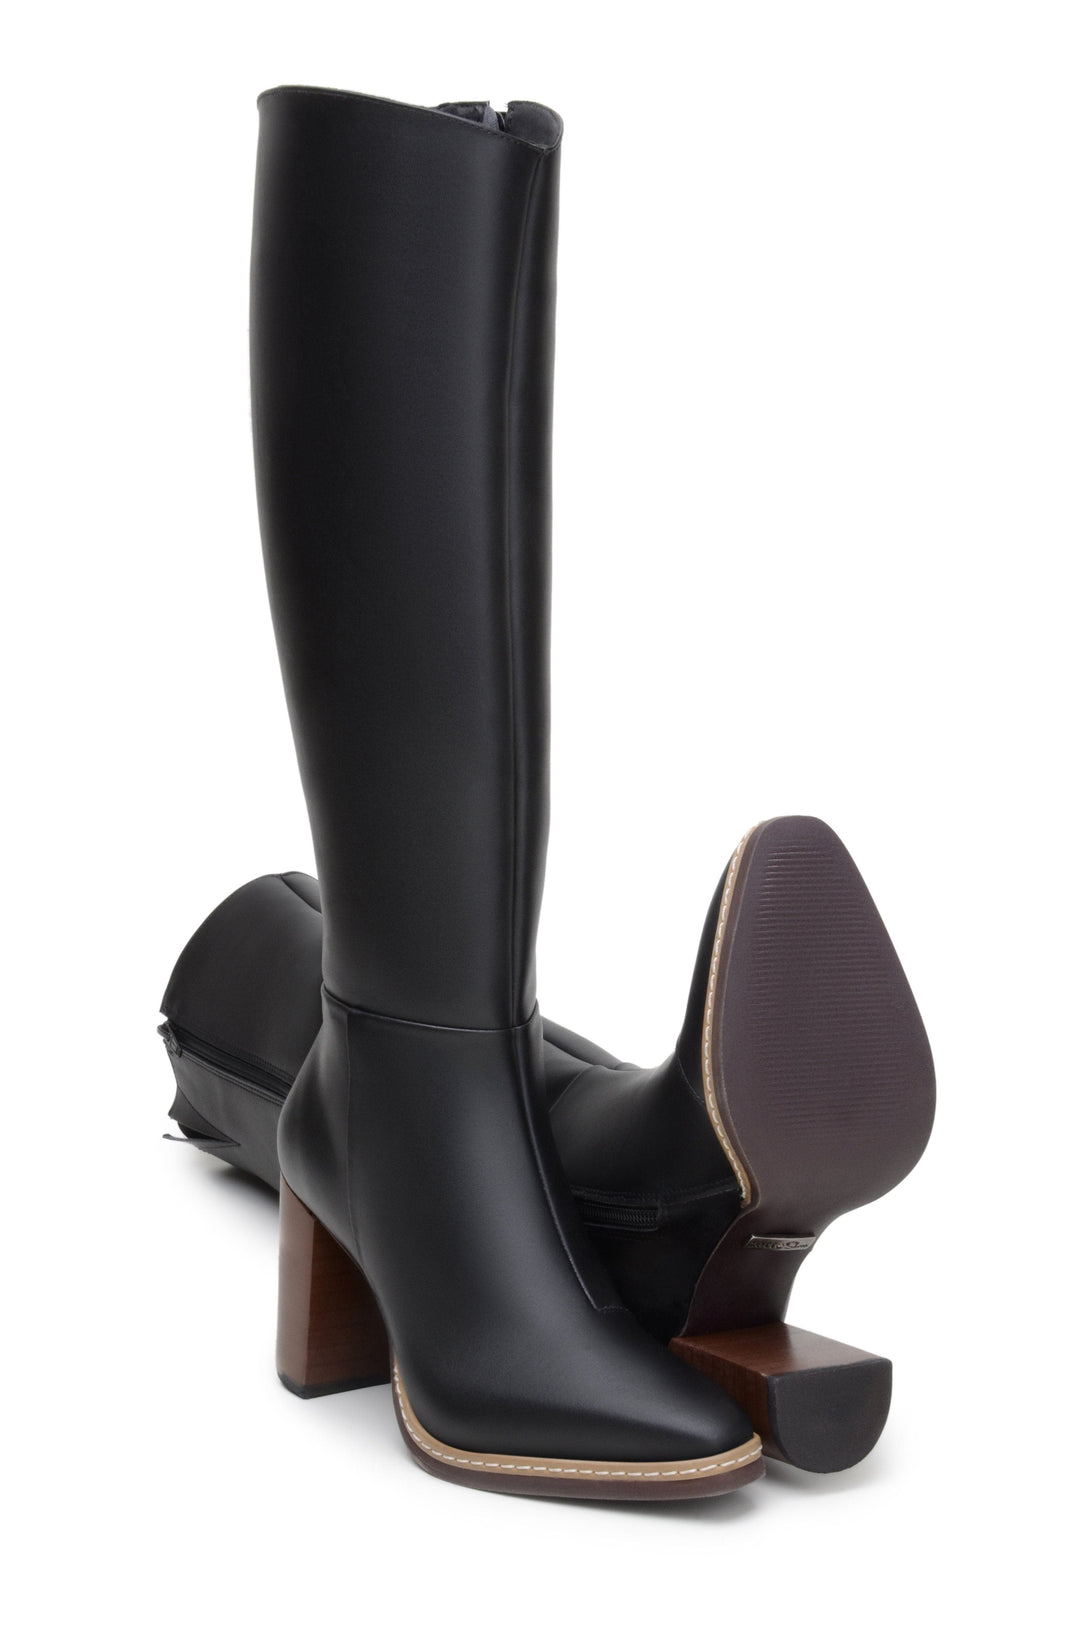 'Lucinda' vegan leather knee-high boot with high heel by Zette Shoes - black